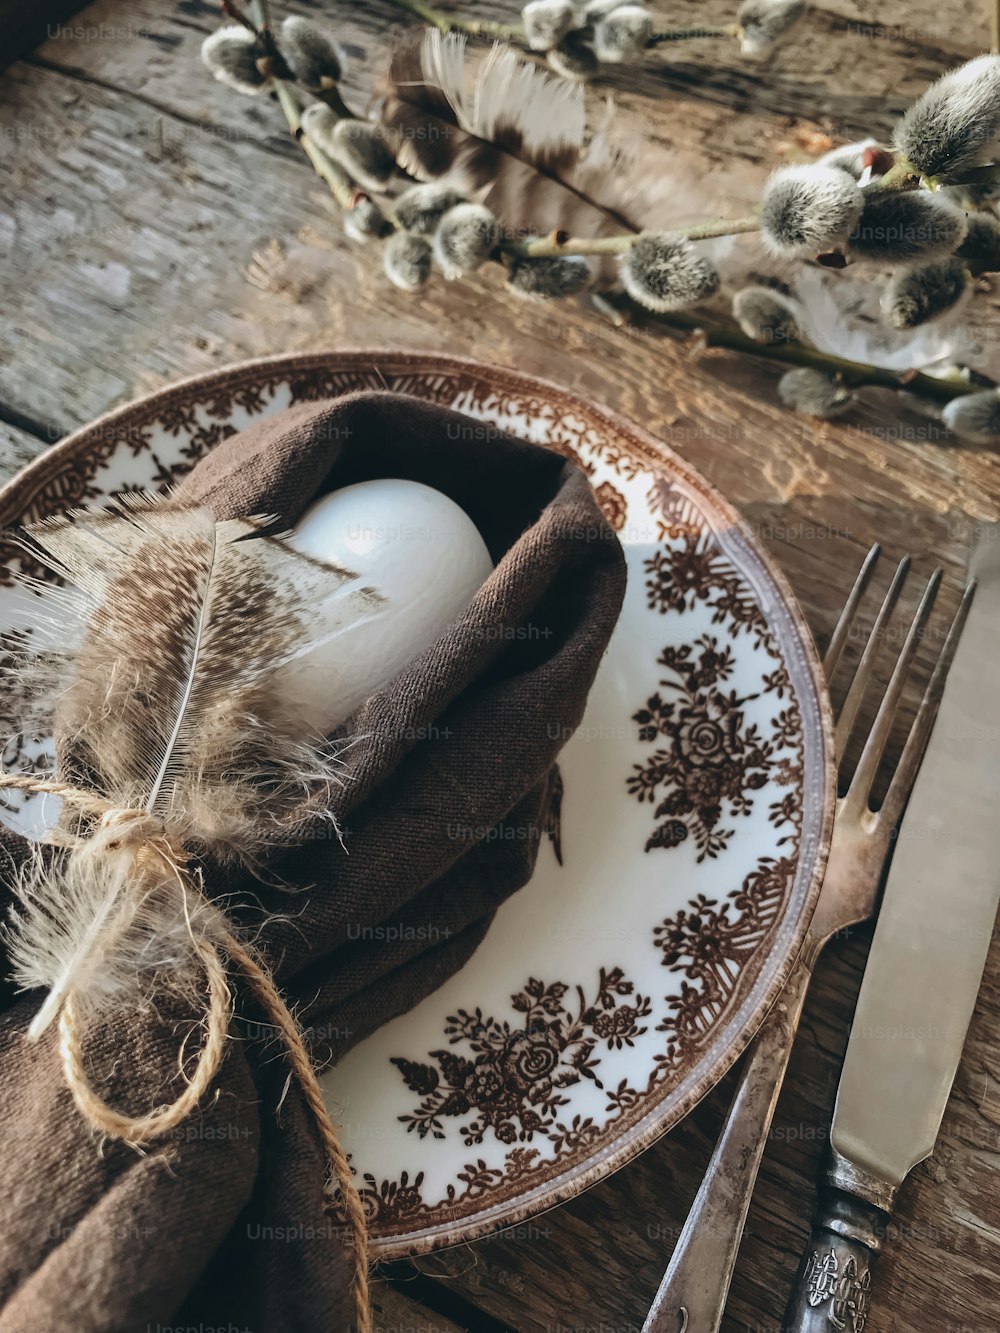 Natural easter egg in napkin with soft feathers, vintage plate and cutlery on aged wooden table. Stylish rustic Easter table setting. Rural Easter still life. Happy Easter